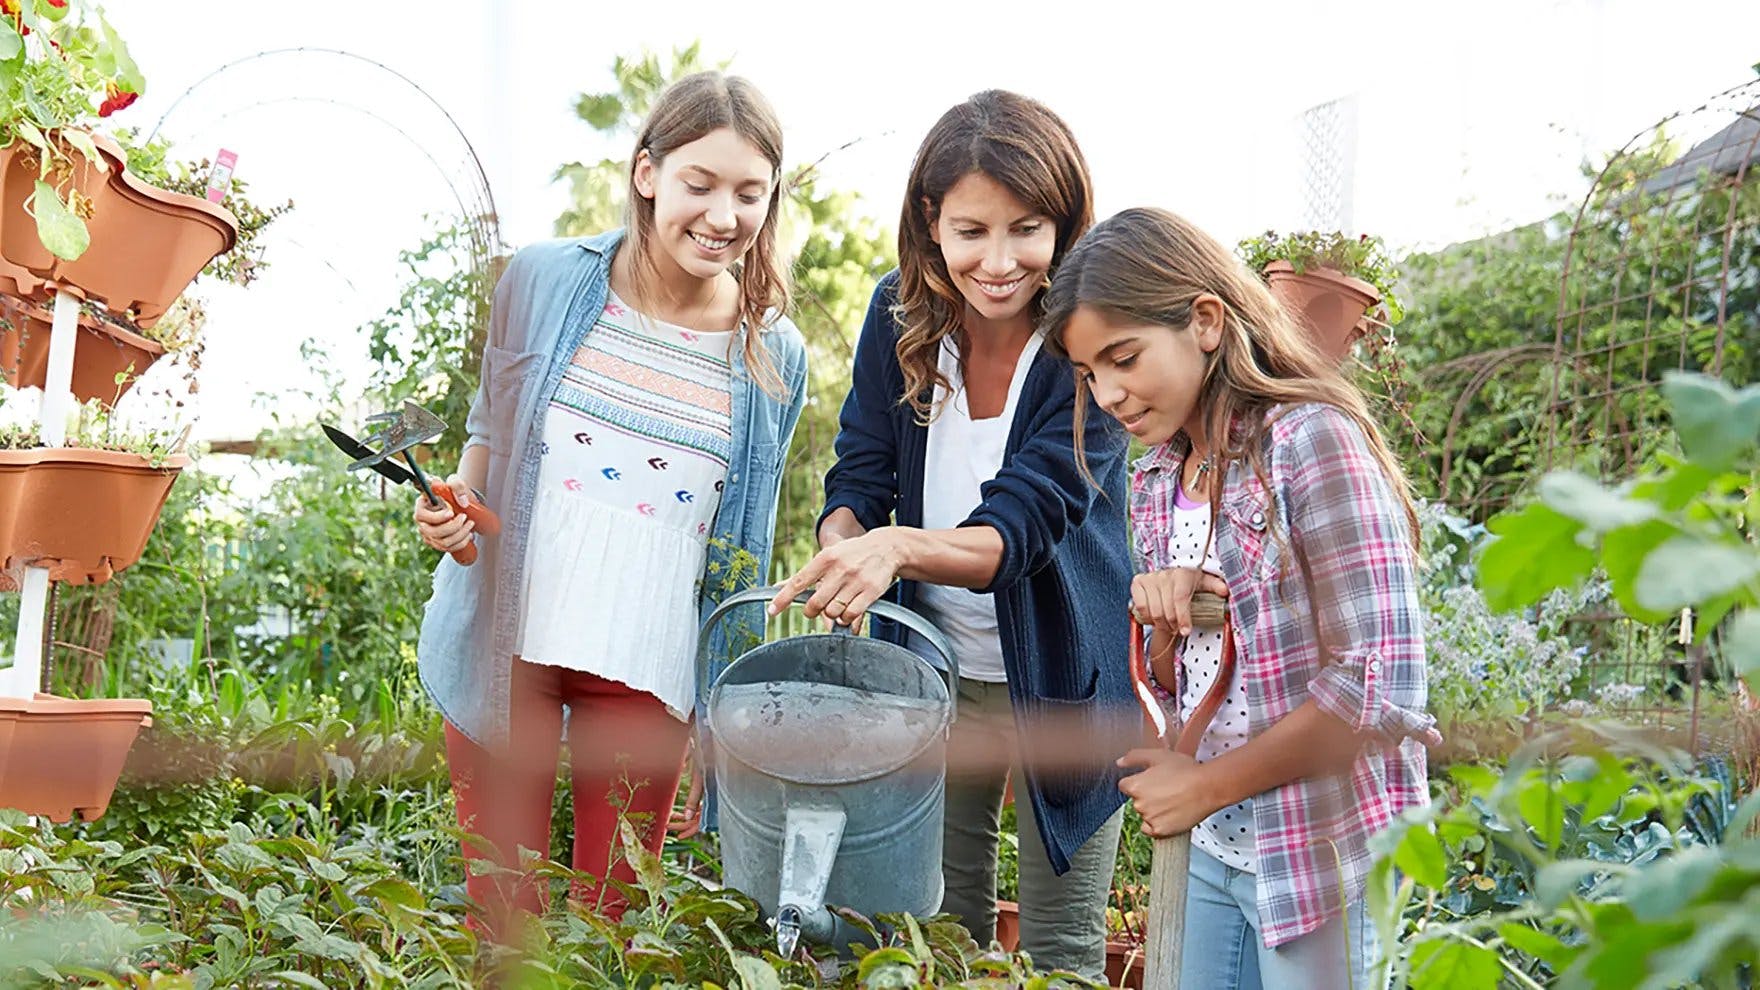 A mother and two preteen girls holding gardening tools surrounded by plants